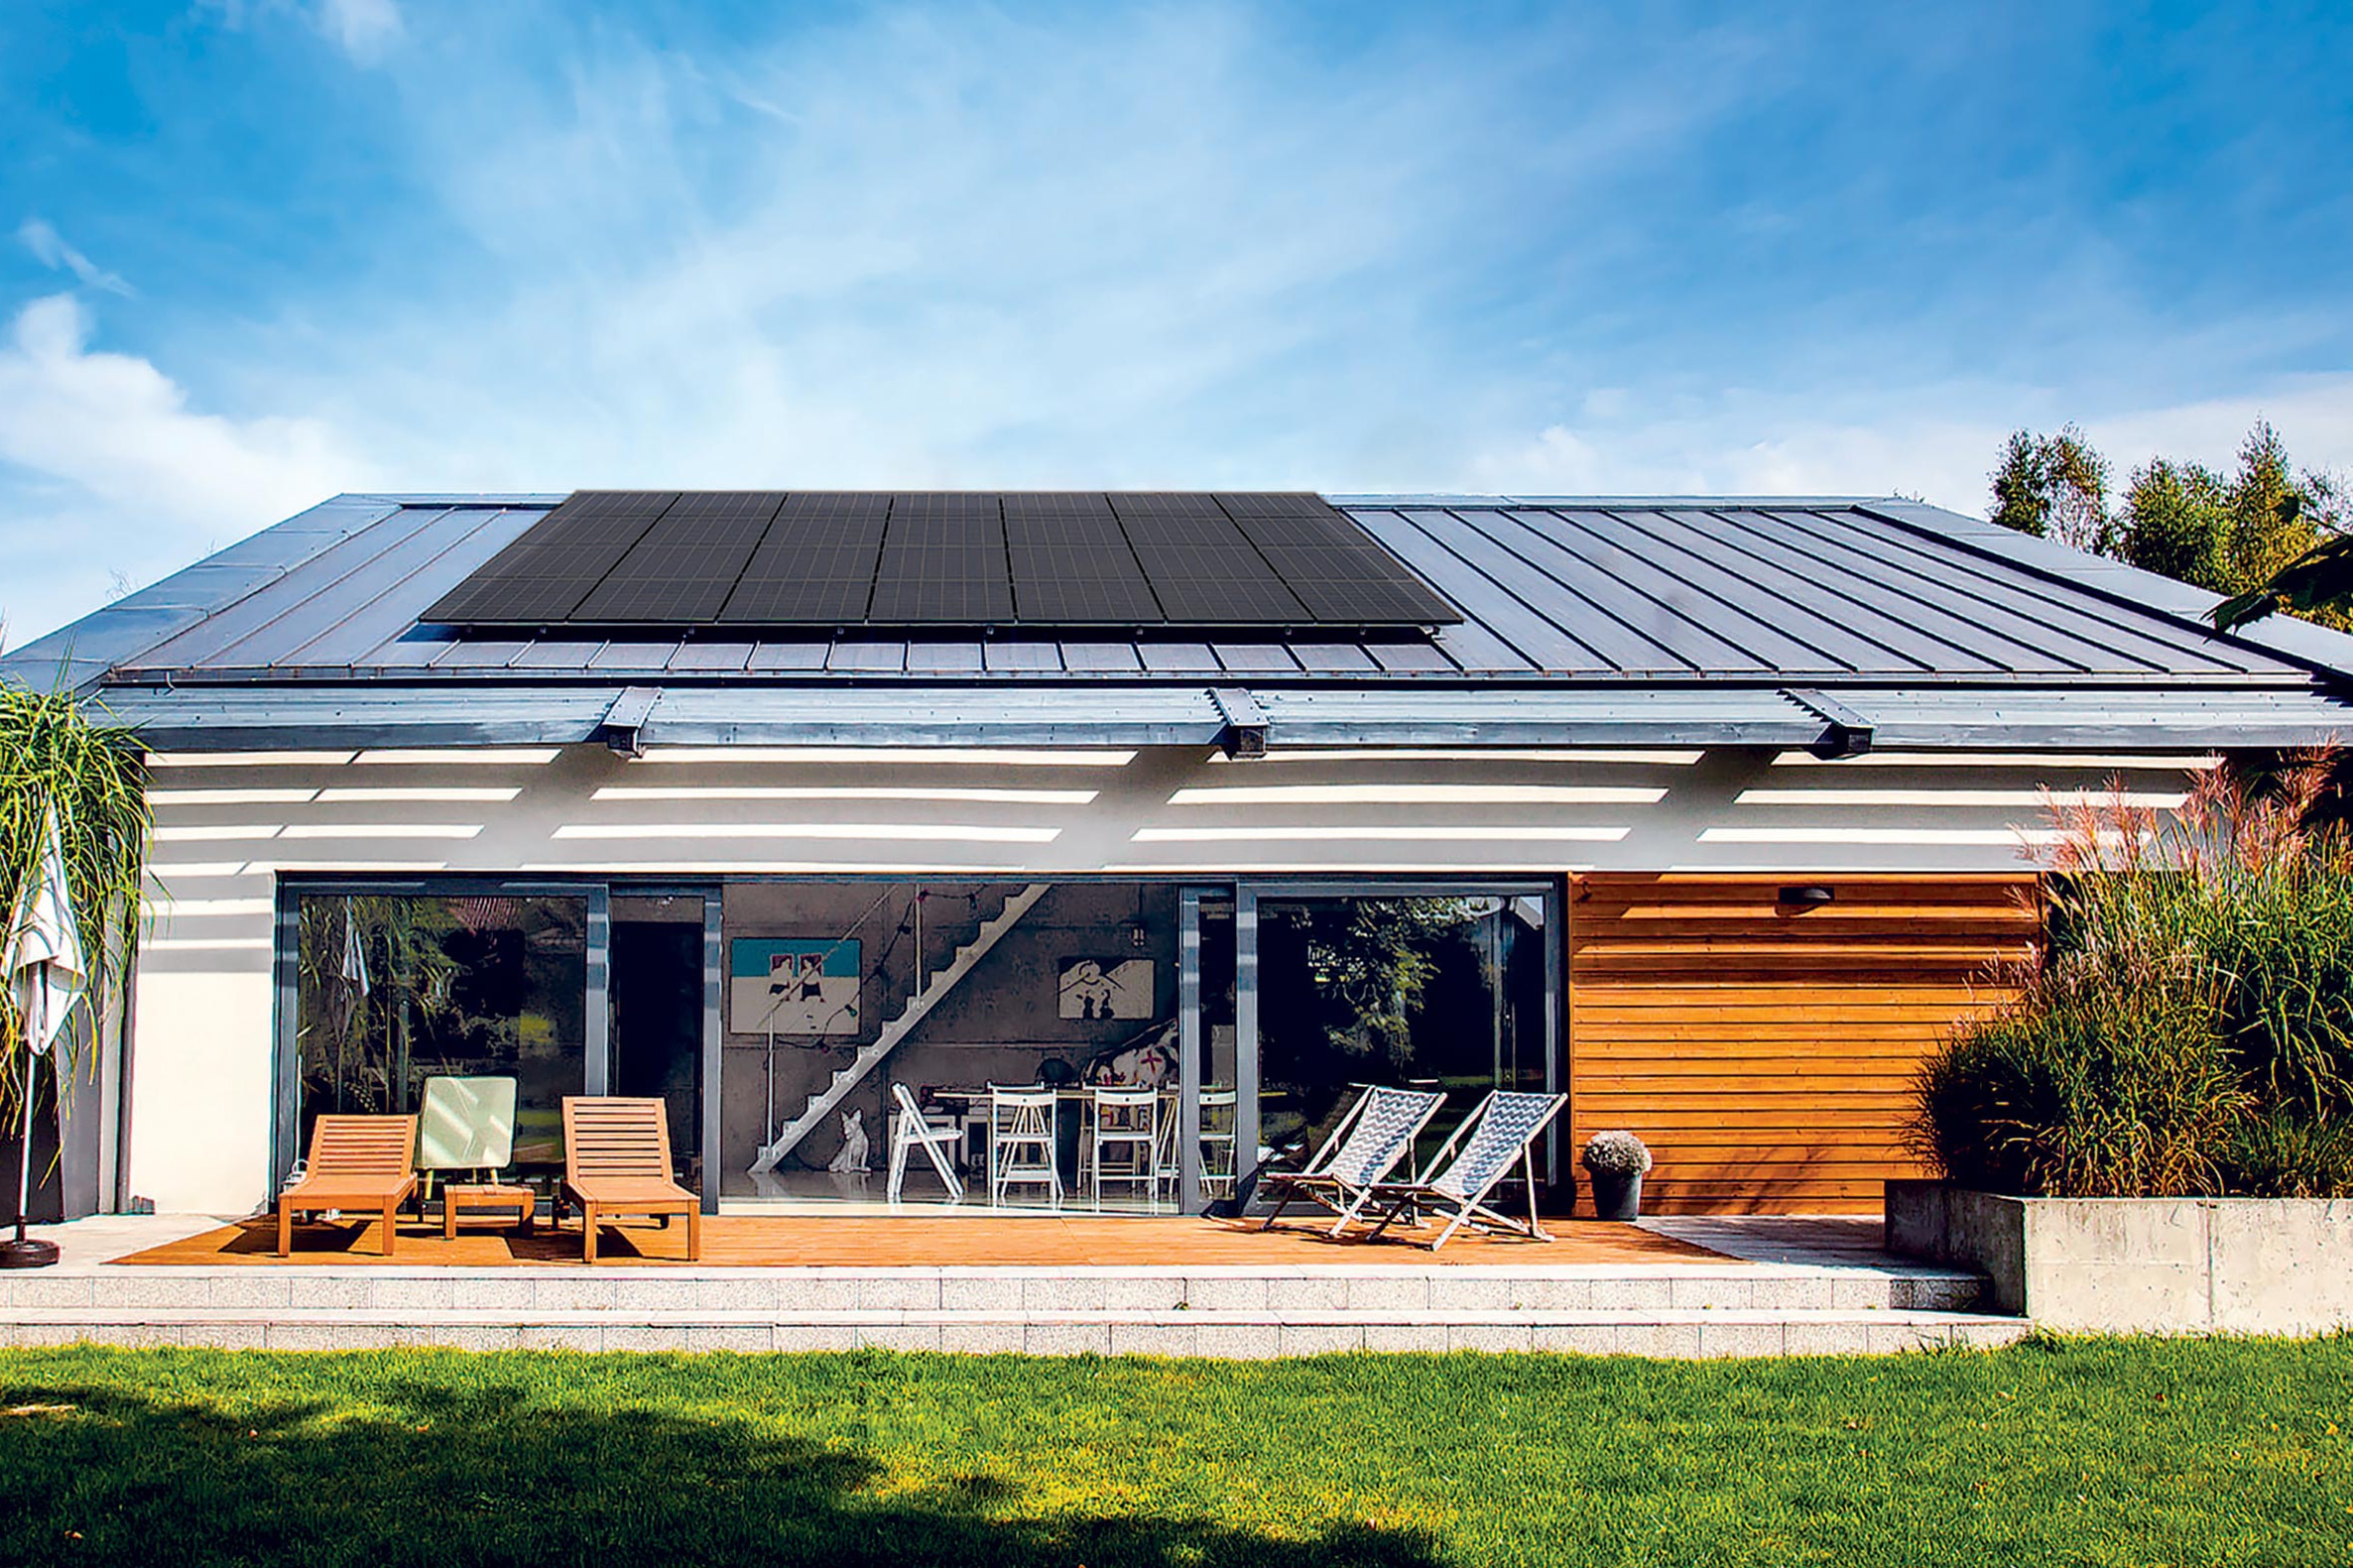 How Can Solar Panels Really Improve a Property?